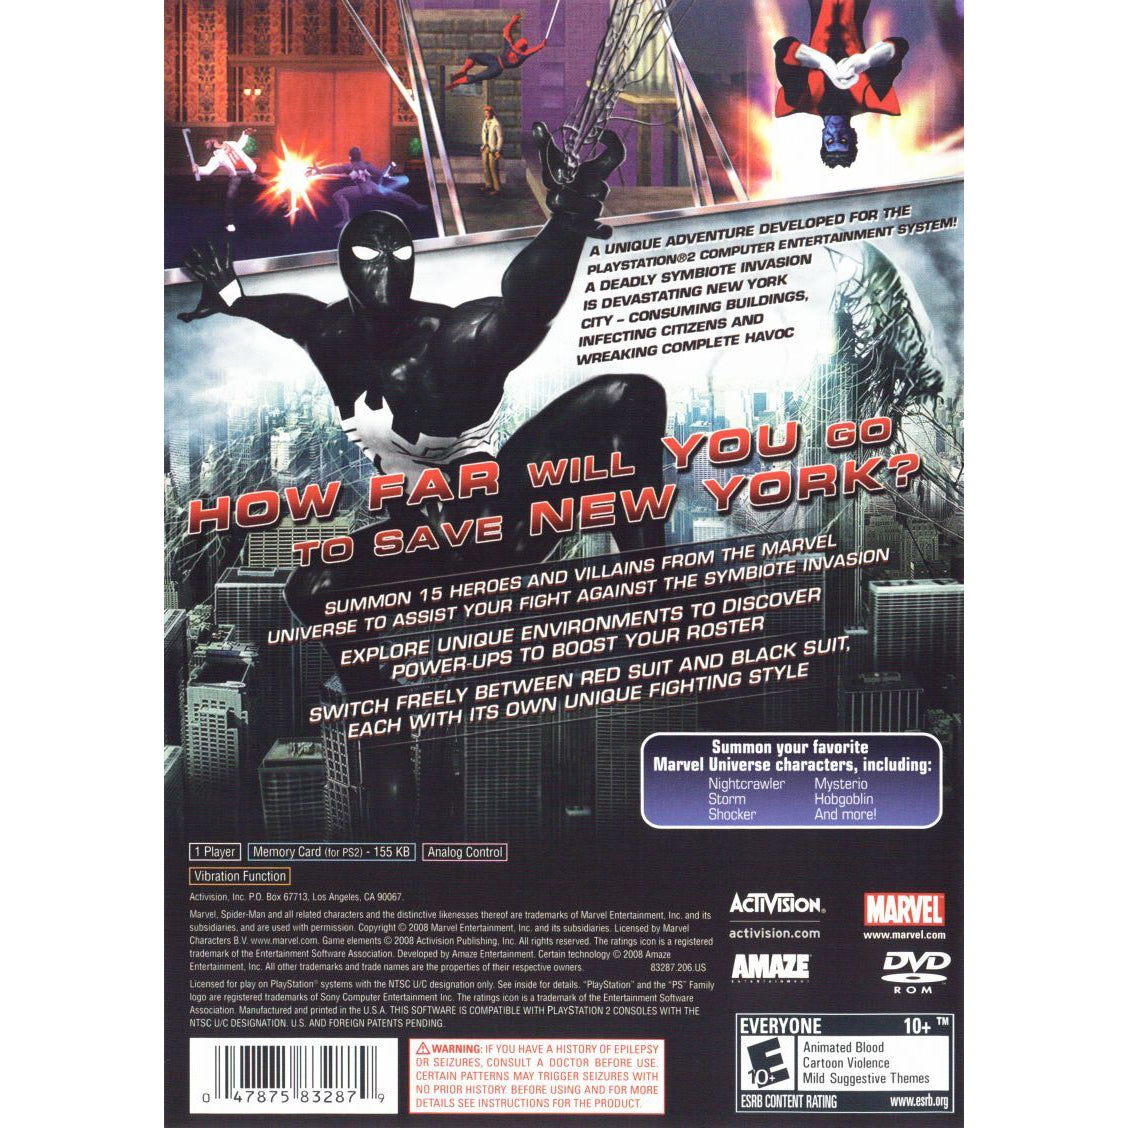 Spider-Man: Web of Shadows - Amazing Allies Edition - PlayStation 2 (PS2) Game Complete - YourGamingShop.com - Buy, Sell, Trade Video Games Online. 120 Day Warranty. Satisfaction Guaranteed.